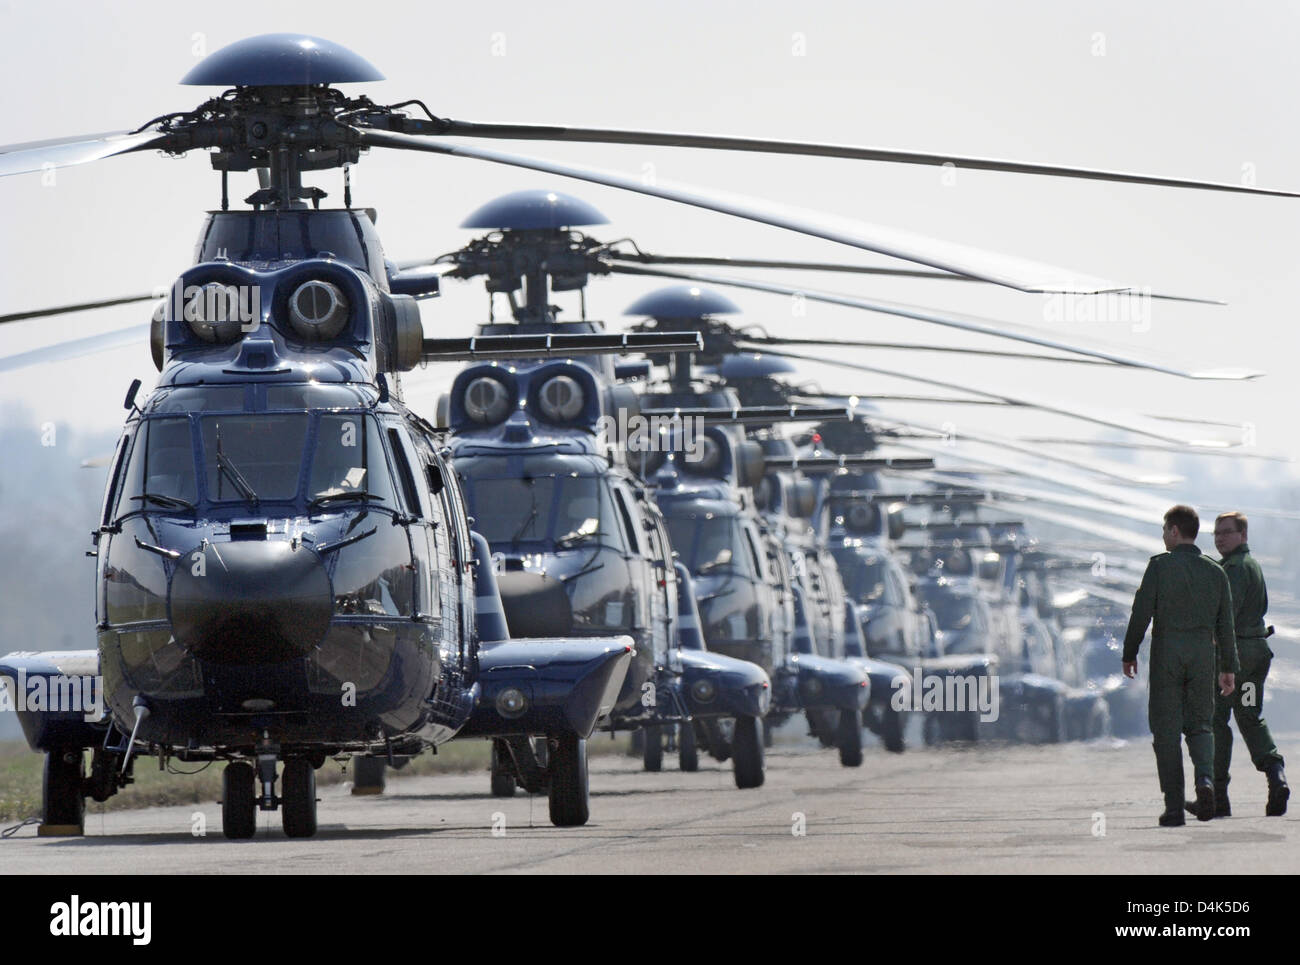 A long row of helicopters of the type ?Super-Puma? stands on an airport near Offenburg, Germany, 02 April 2009. In case of emergency, they can start within a few minutes and bring special units or delegations to their place of destination. Photo: Boris Roessler Stock Photo